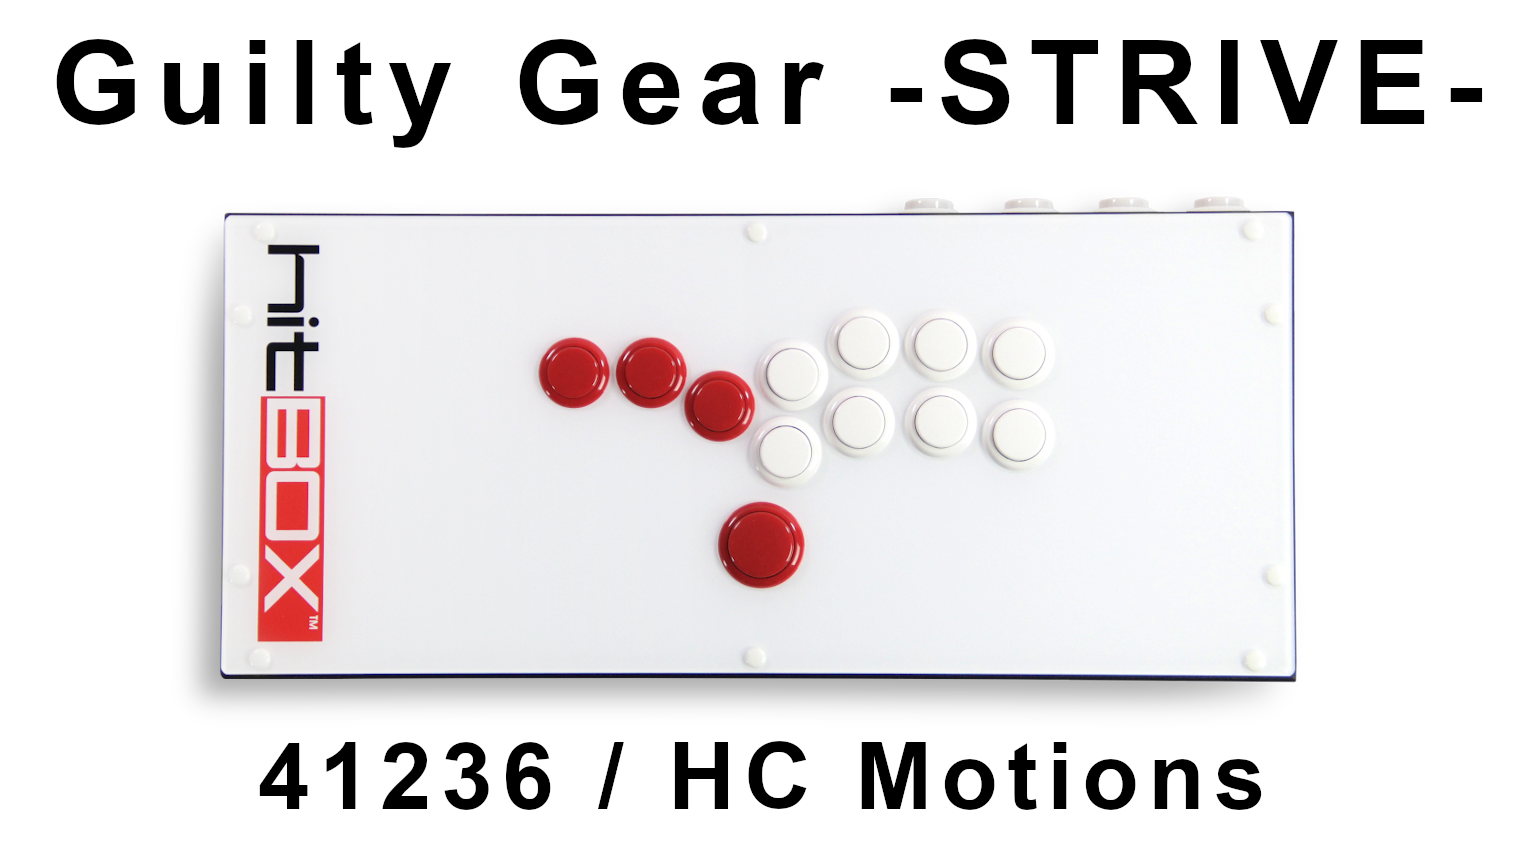 Guilty Gear -STRIVE- on Hit Box - 41236 / HC Motions